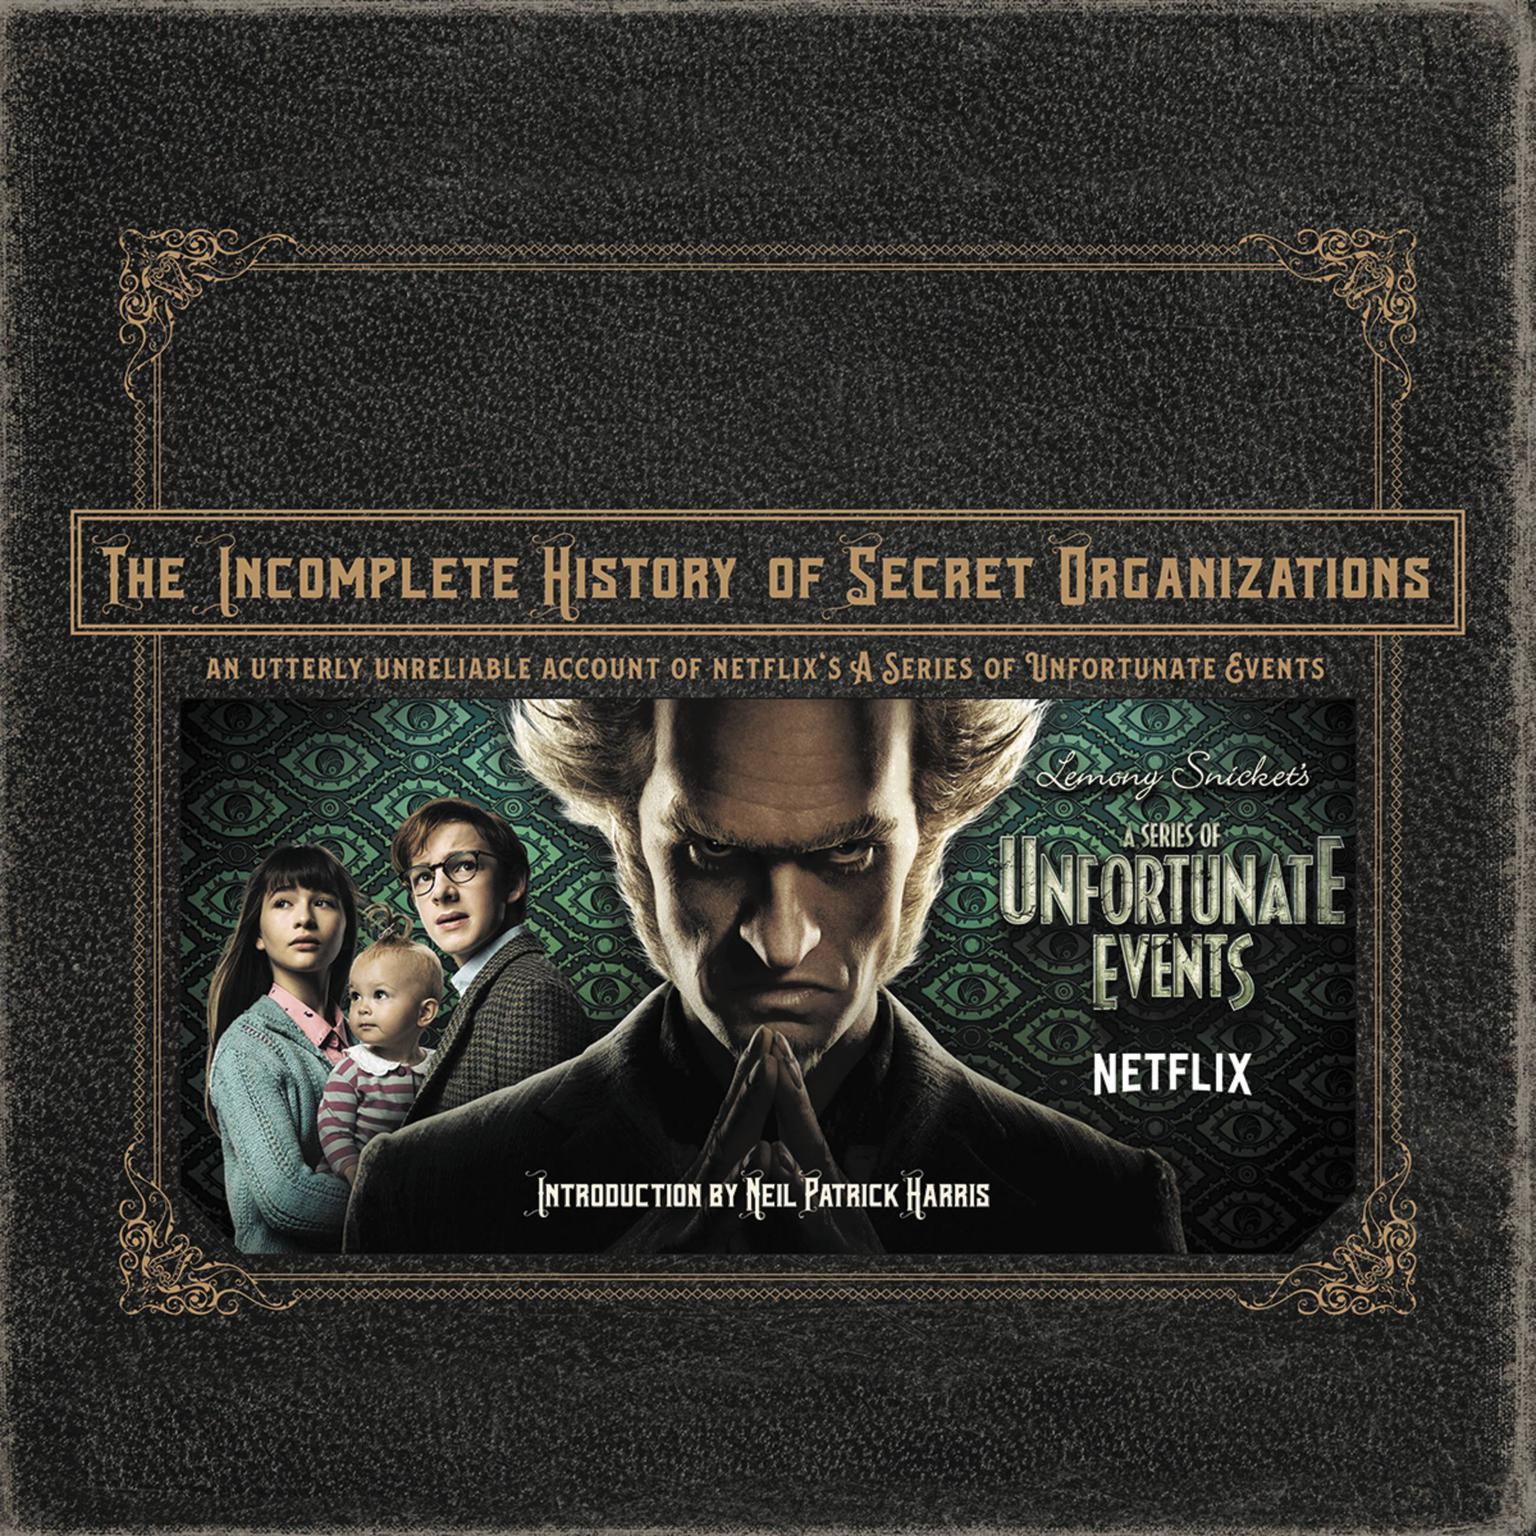 The Incomplete History of Secret Organizations: An Utterly Unreliable Account of Netflixs A Series of Unfortunate Events Audiobook, by Joe Tracz